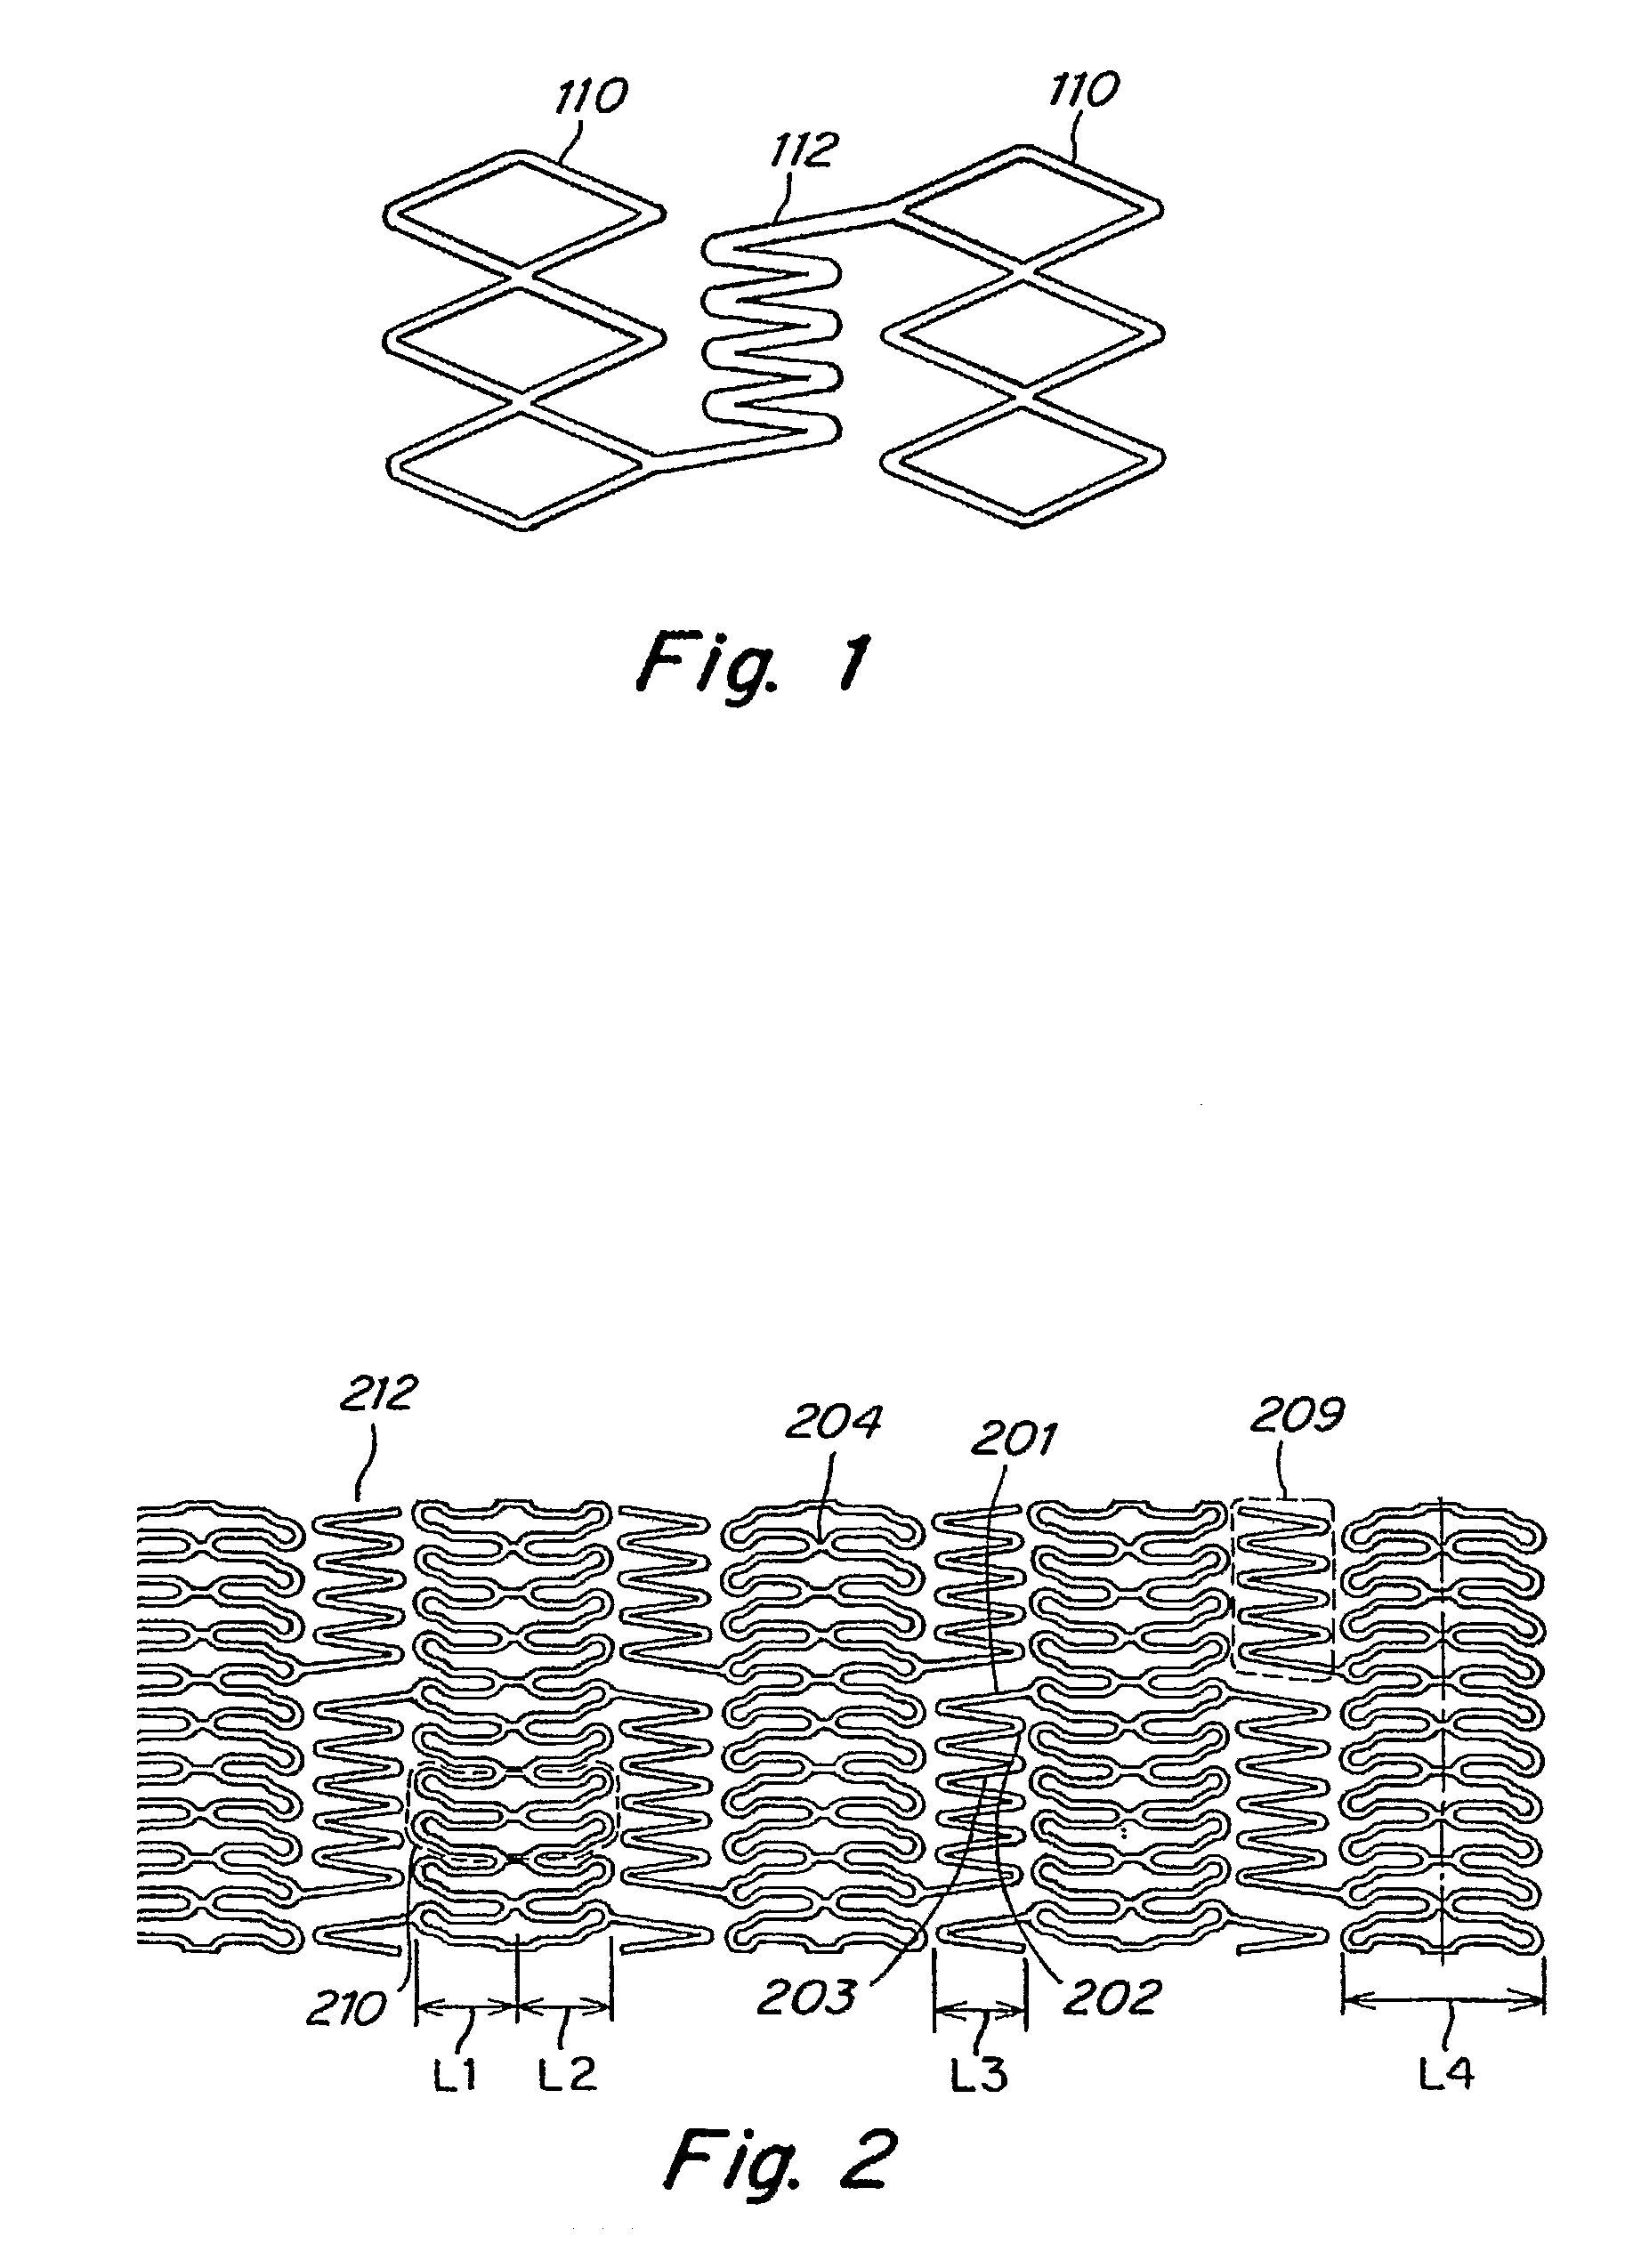 Controlled fracture connections for stents